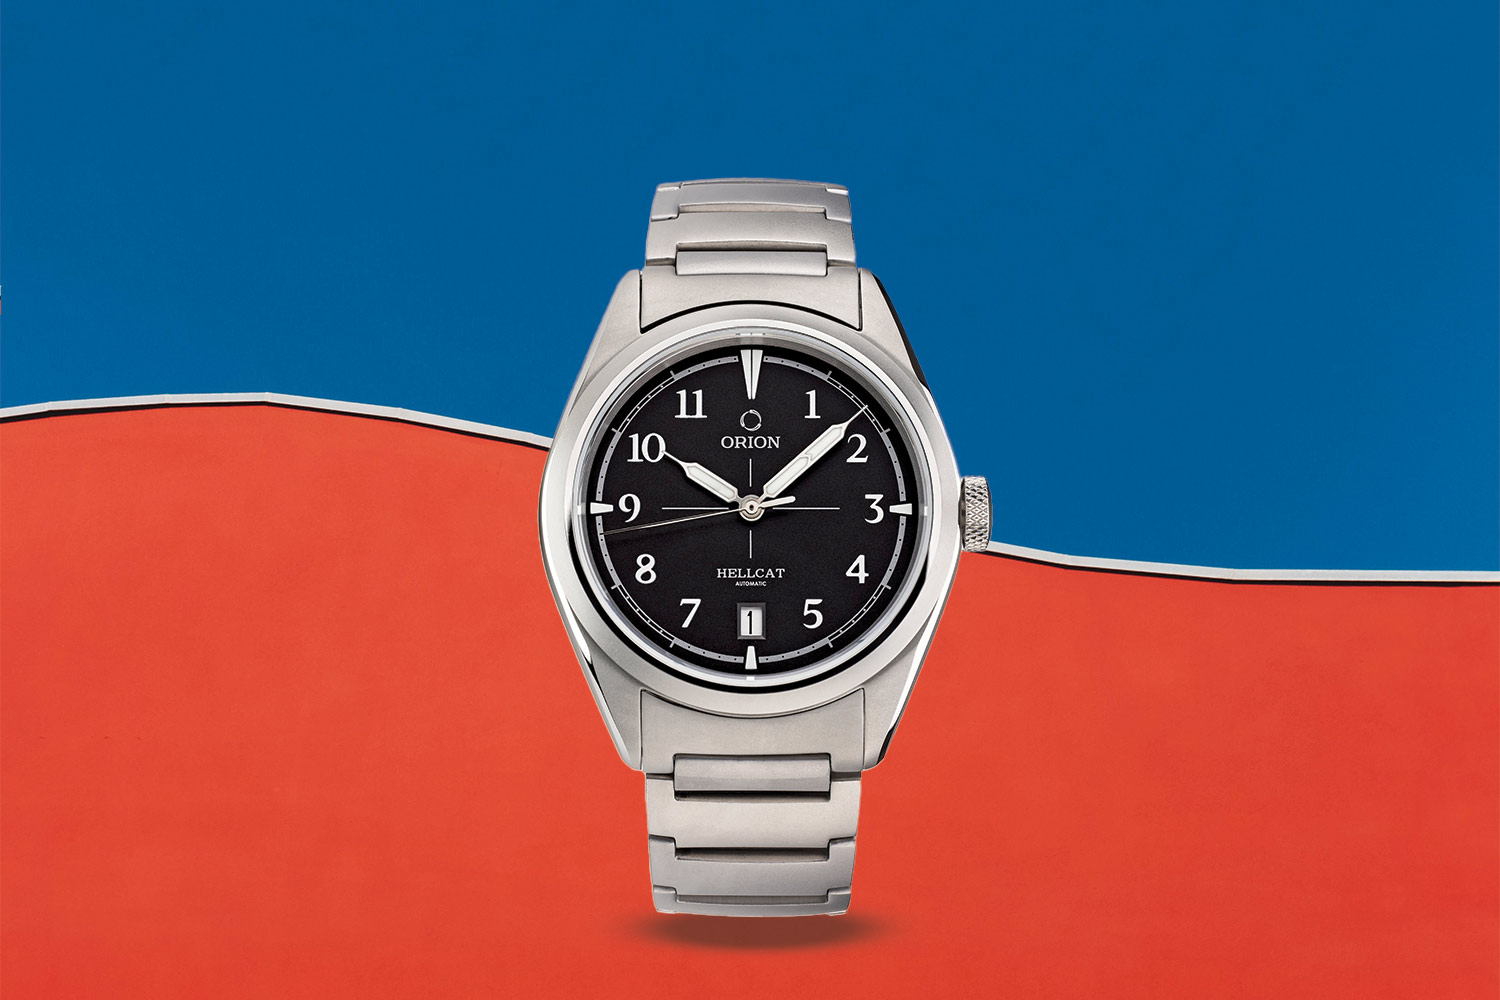 Silver and black watch